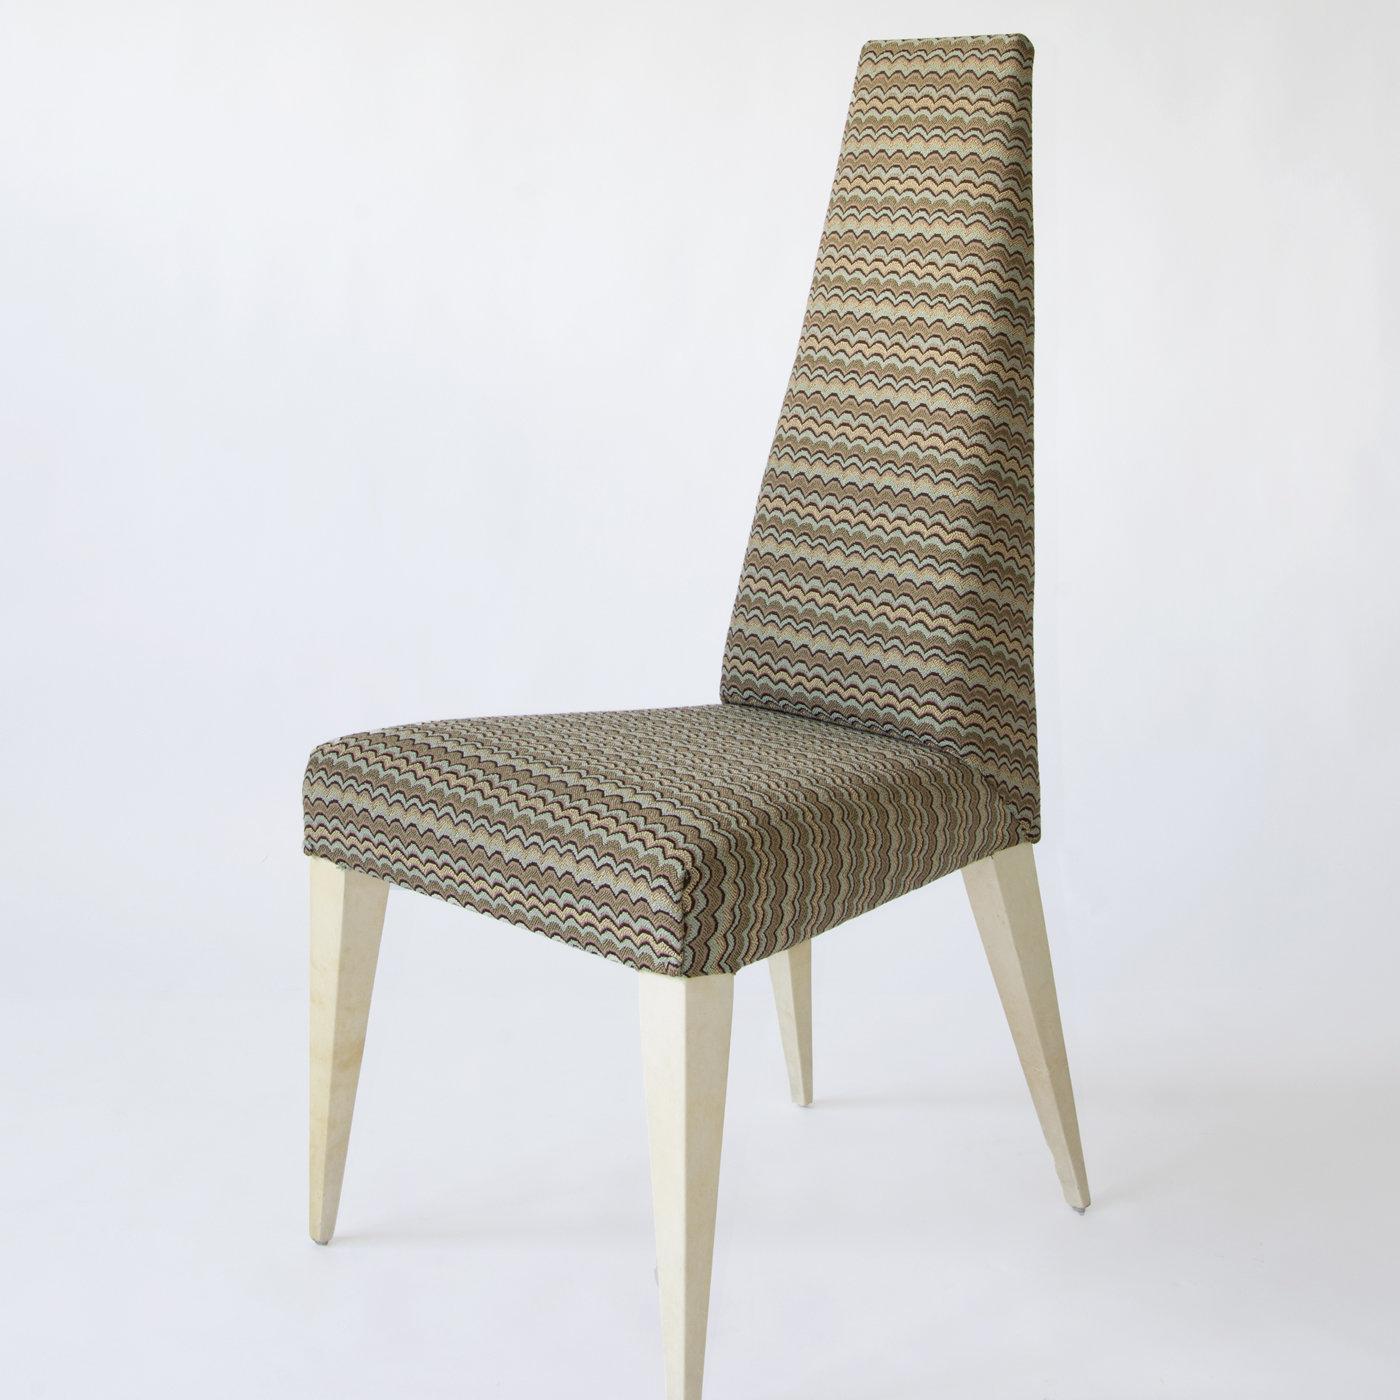 With sleek lines and a unique design, the Kajal Dining Chair features sturdy, tapered legs covered with natural light-toned parchment for a sophisticated and elegant look. Upholstered in a multicolor fabric that features a subtle pattern in neutral